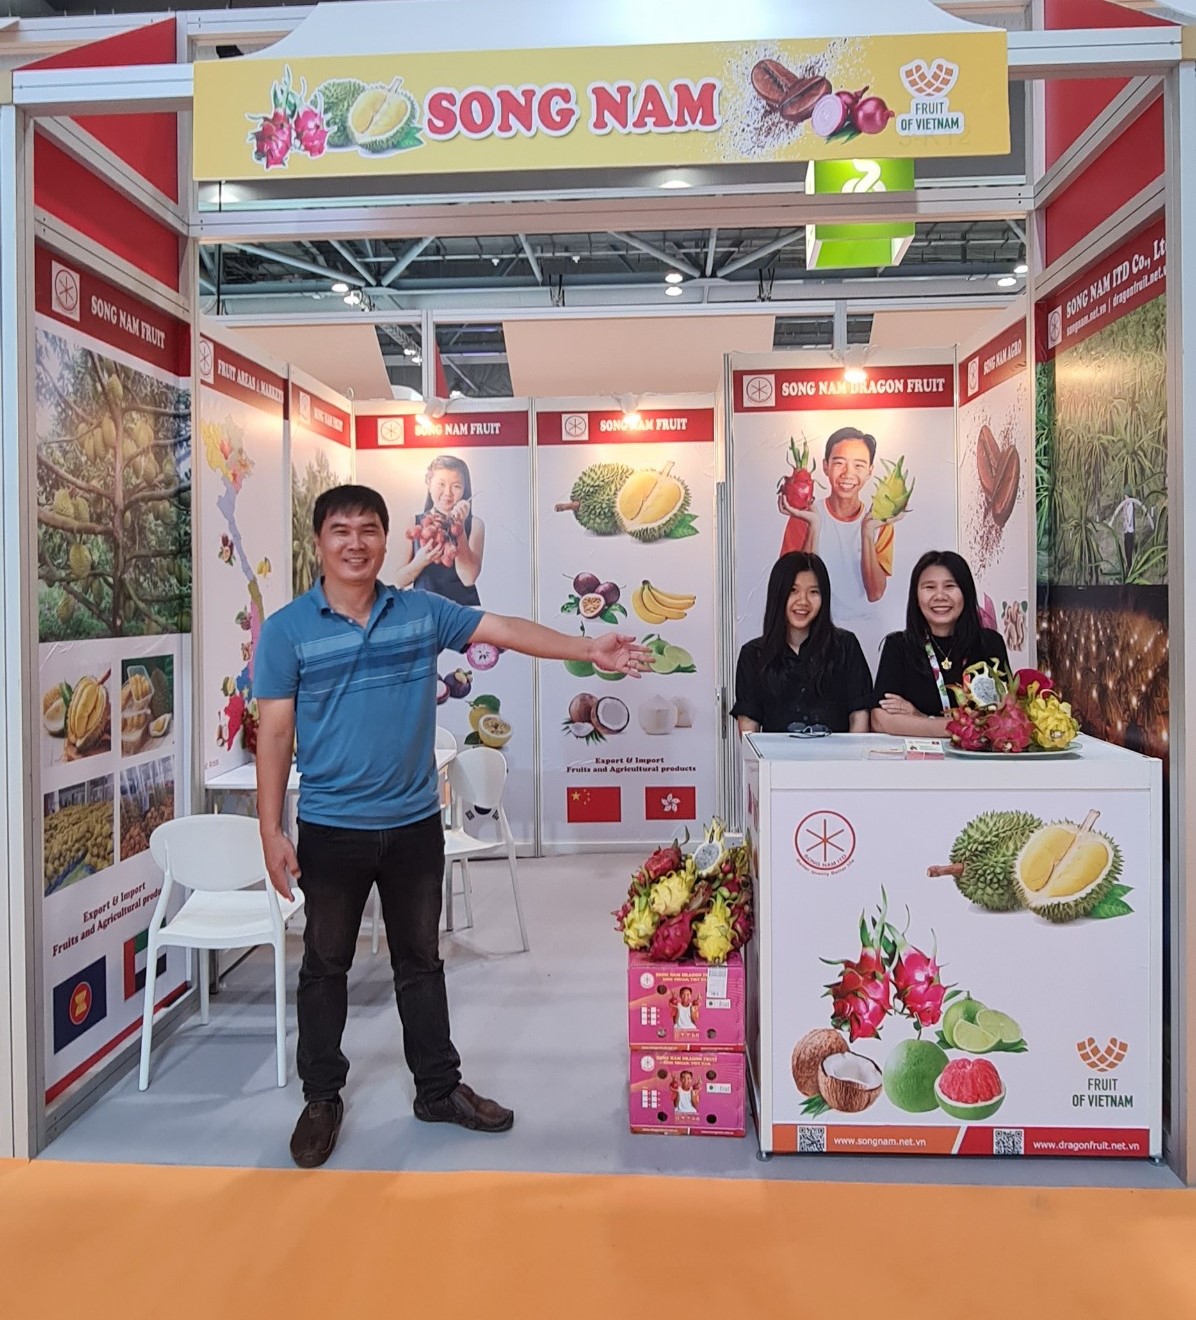 Song Nam booth has presented at the center location (Hall 3C)